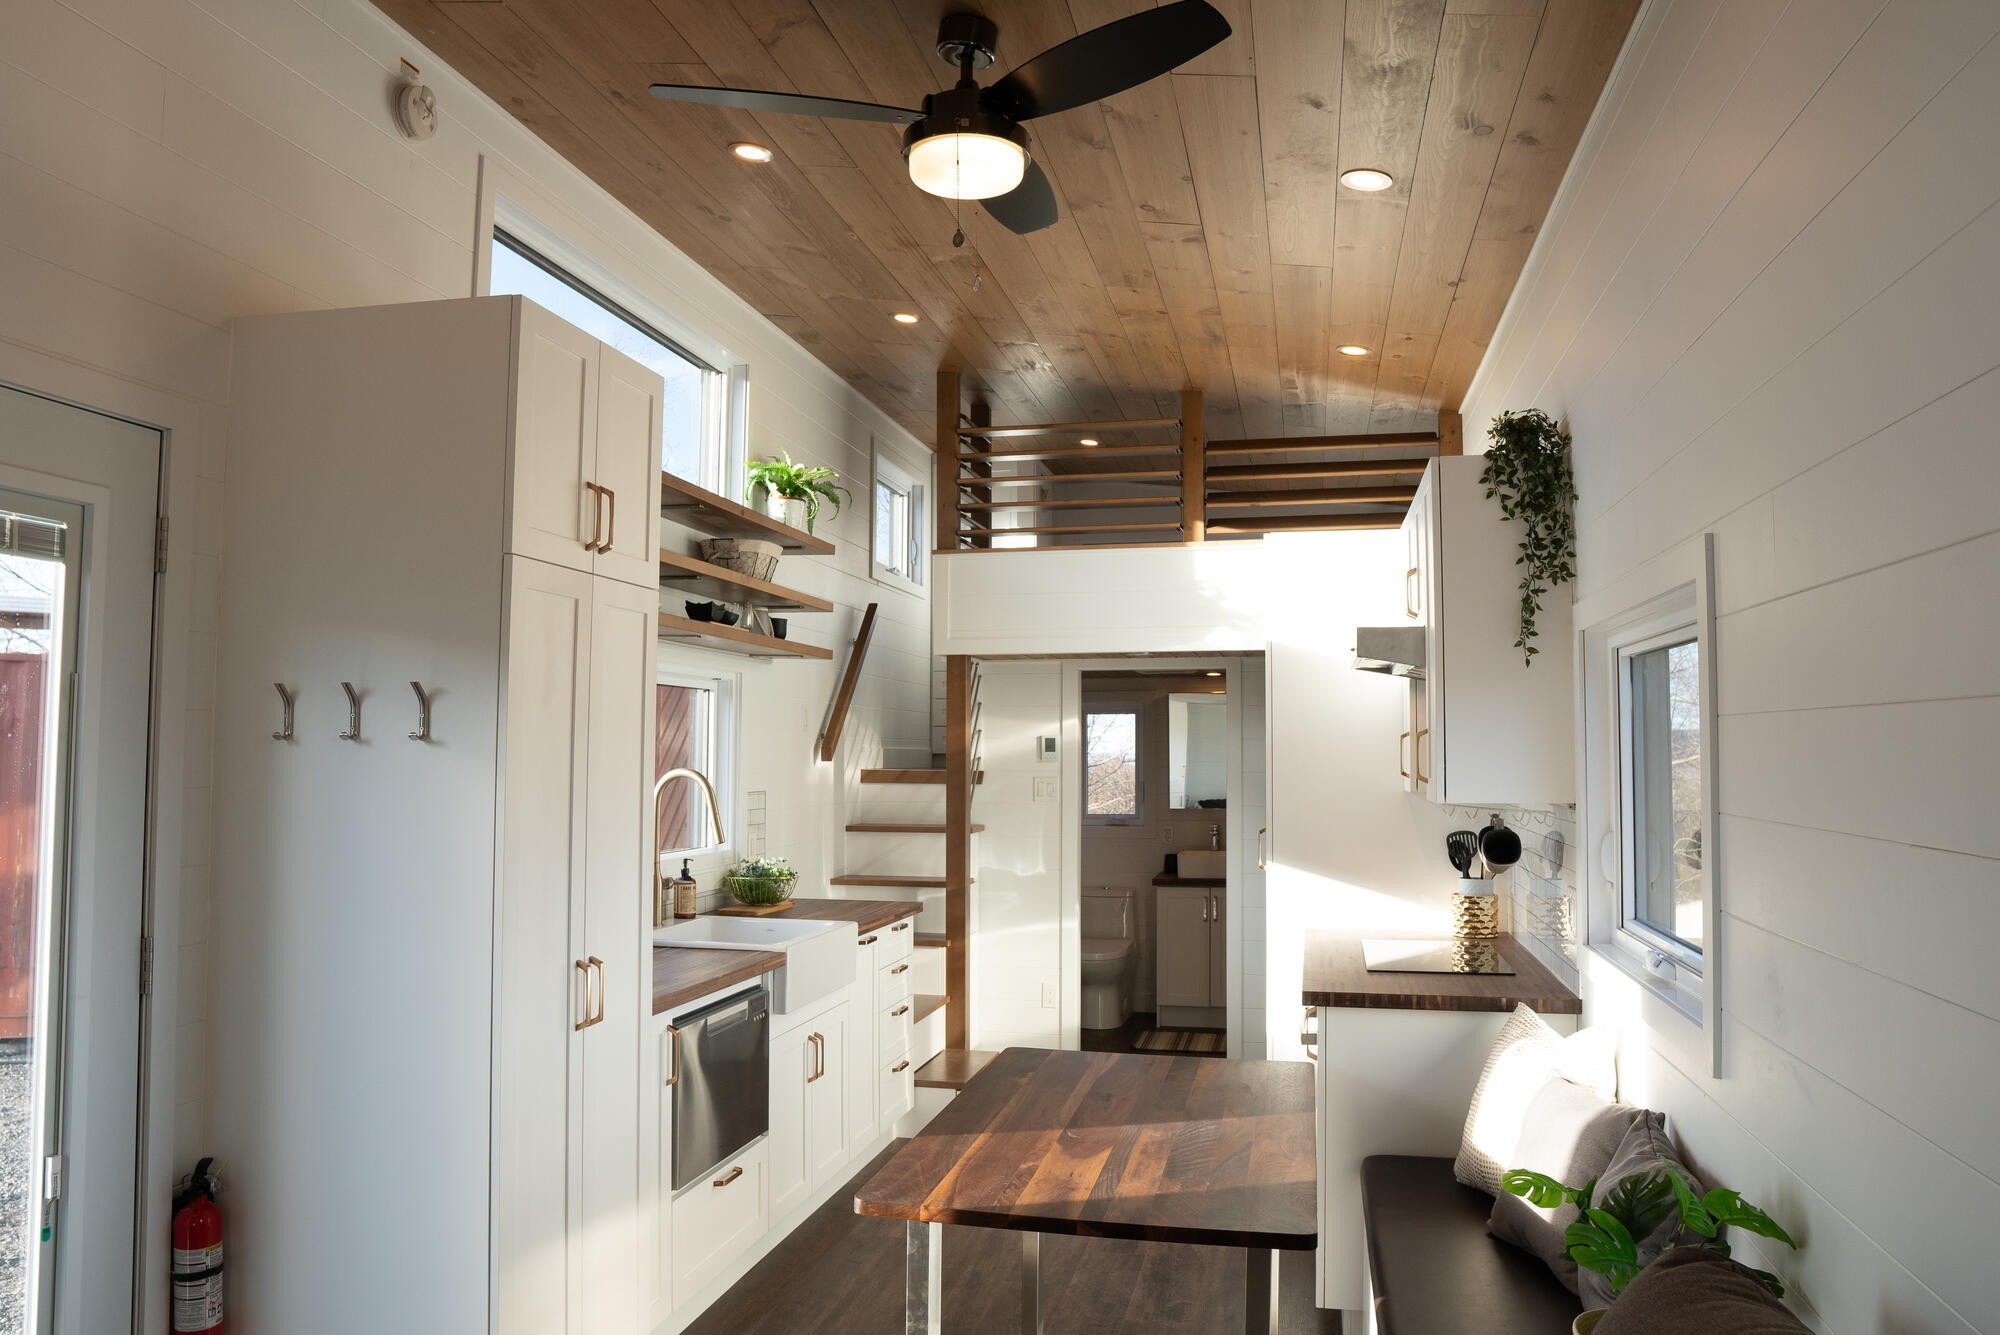 Three-Bedroom Tiny Home Has Everything a Family of Six Could Possibly Need  - autoevolution